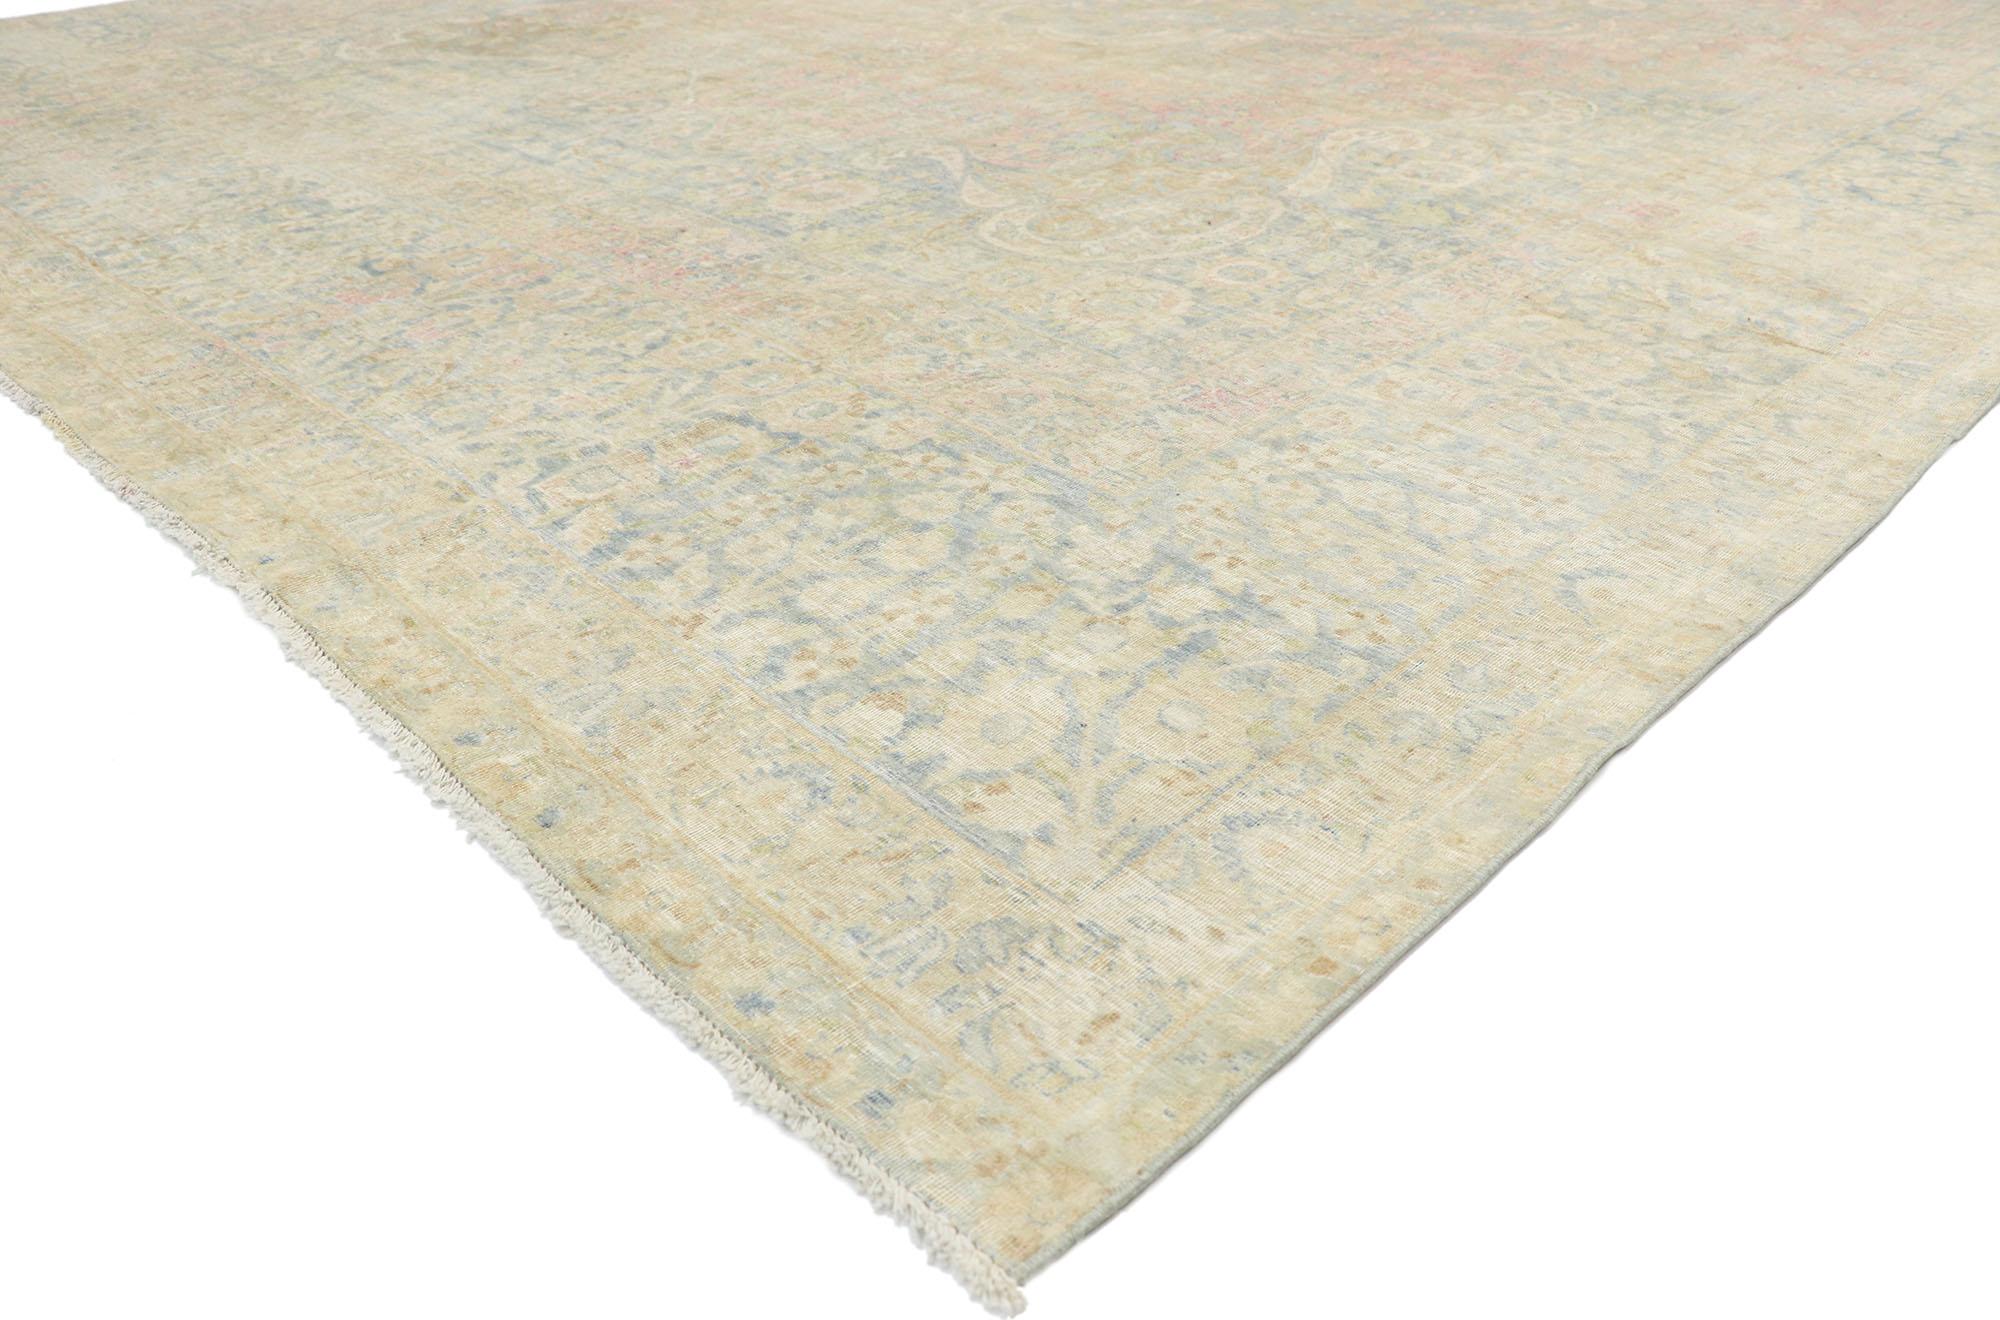 76889 Distressed Antique Persian Yazd Rug with Cotswold Country Cottage Style 10'04 x 15'09. With a timeless floral design and lovingly timeworn appearance, this hand knotted wool distressed antique Persian Yazd rug charms with ease and beautifully